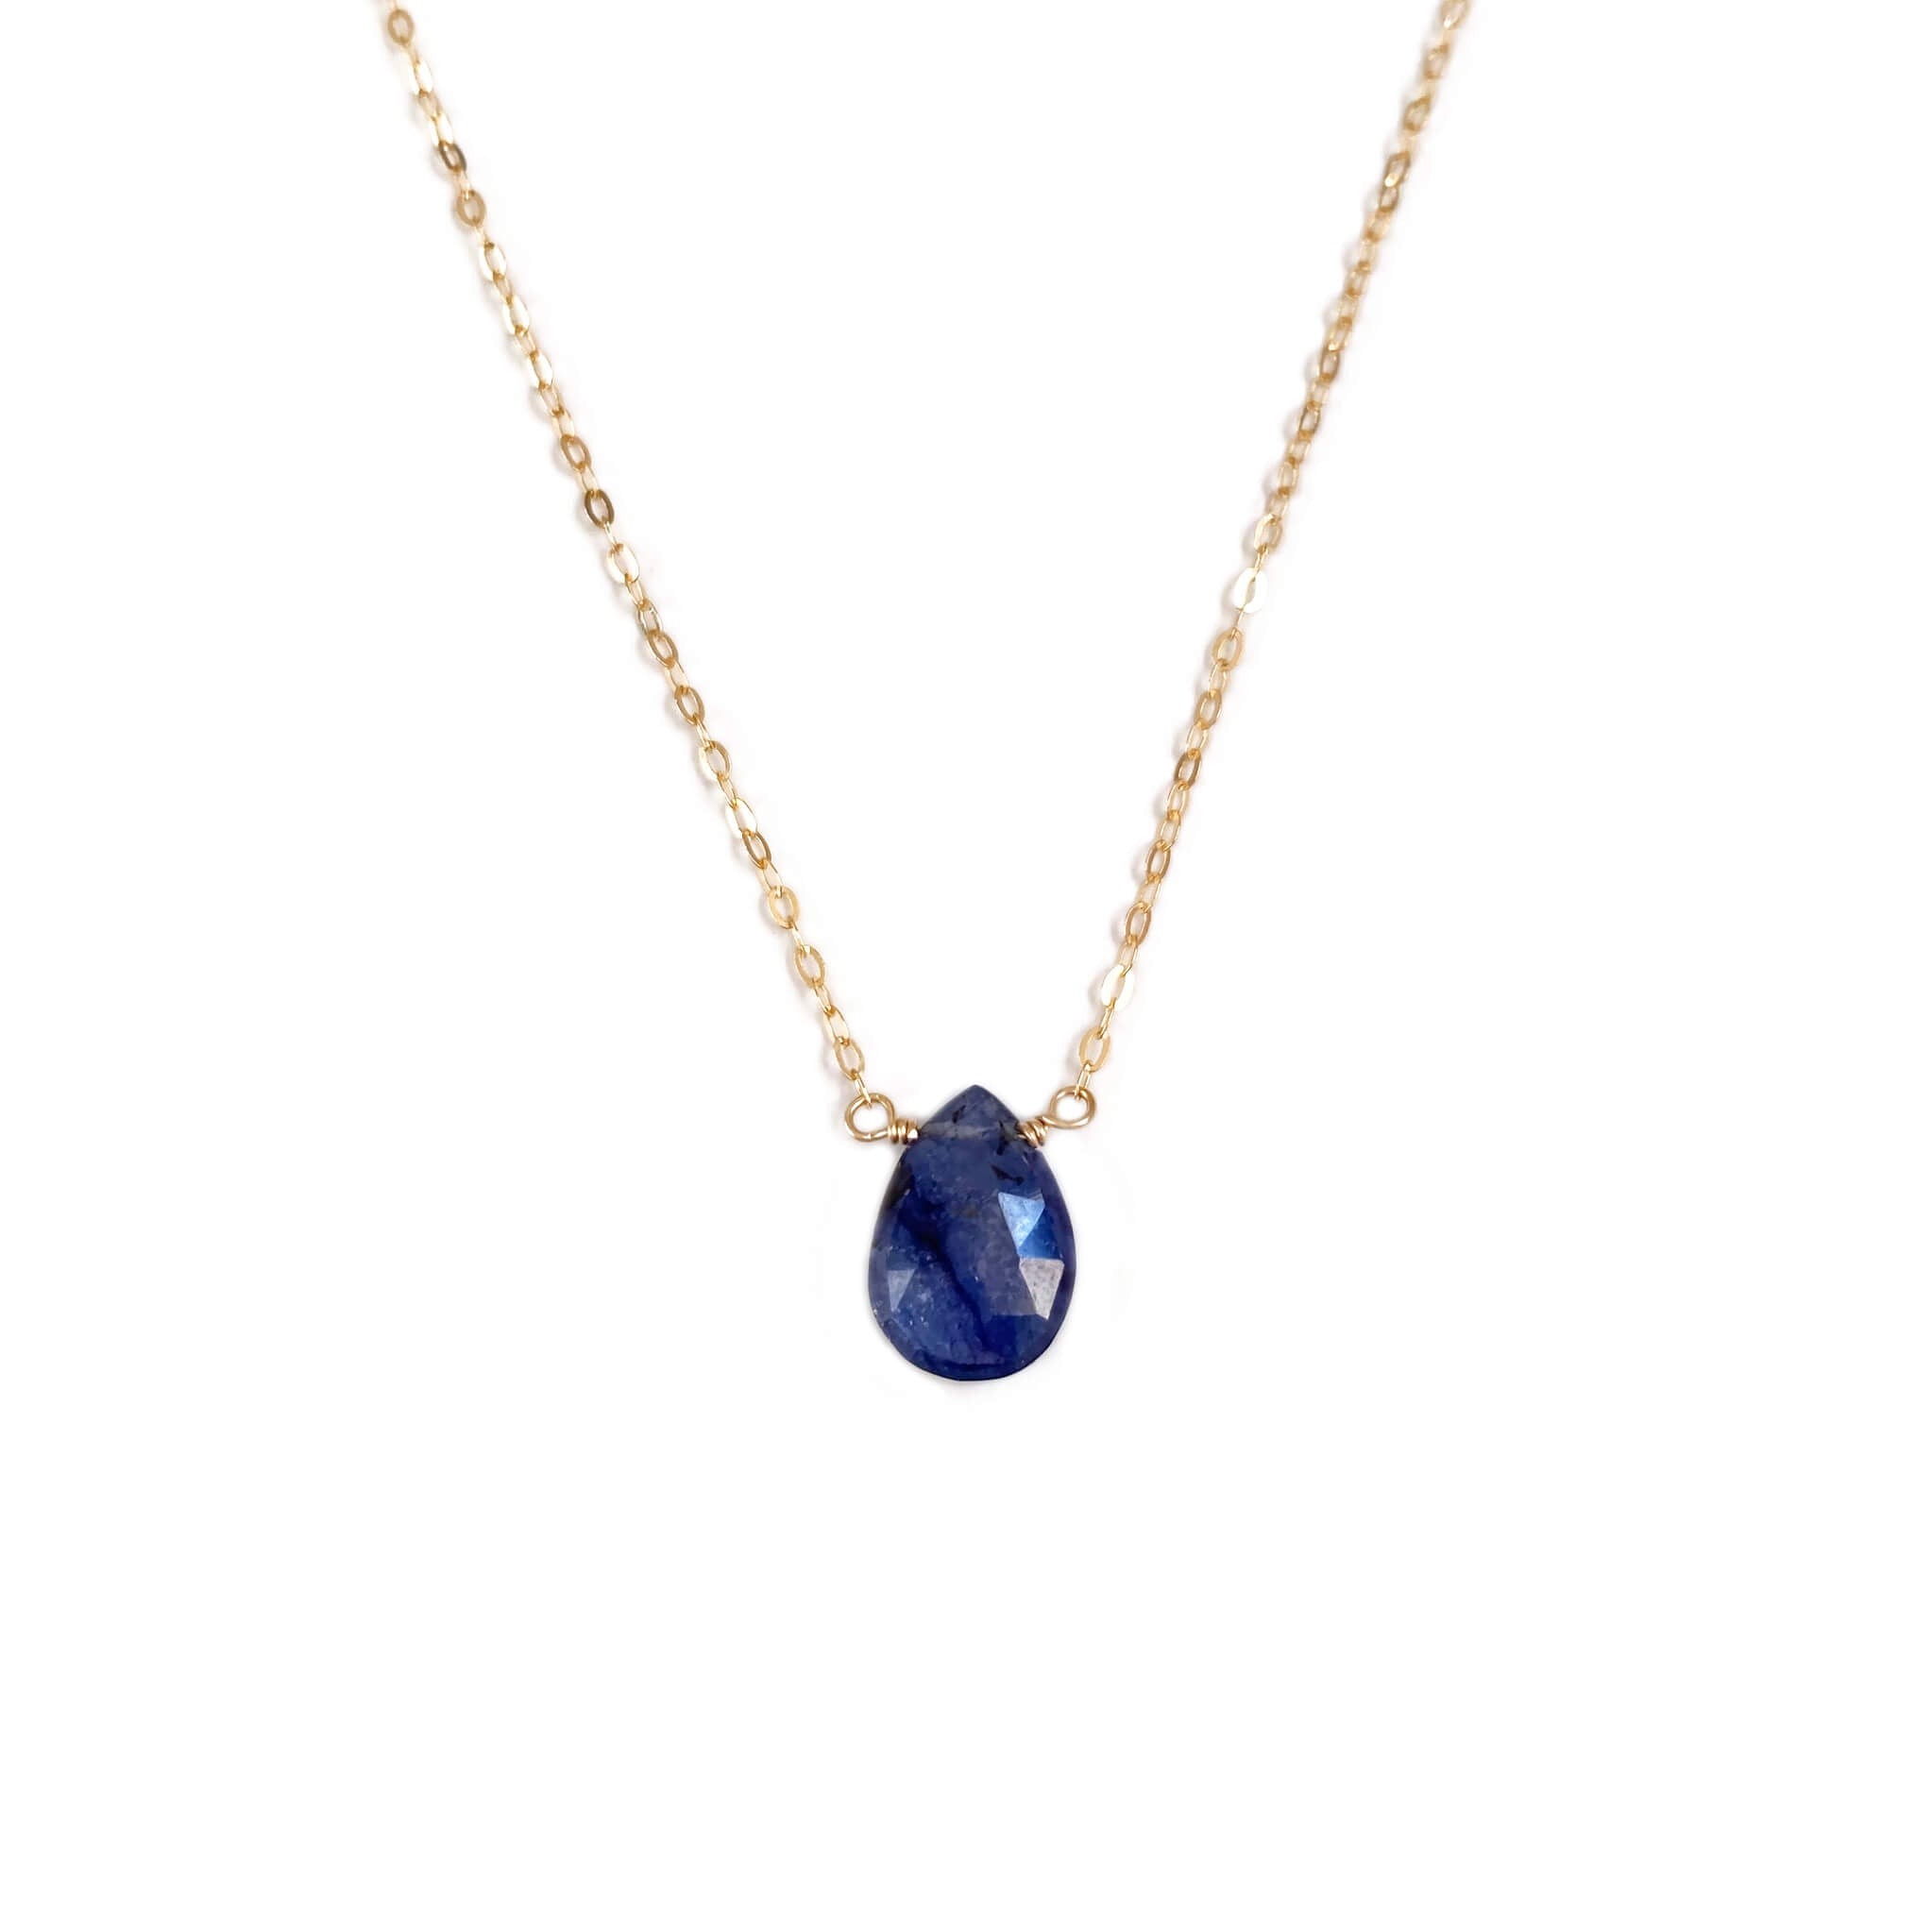 This simple sapphire necklace is made of one single real sapphire with dainty 14k gold chain. 